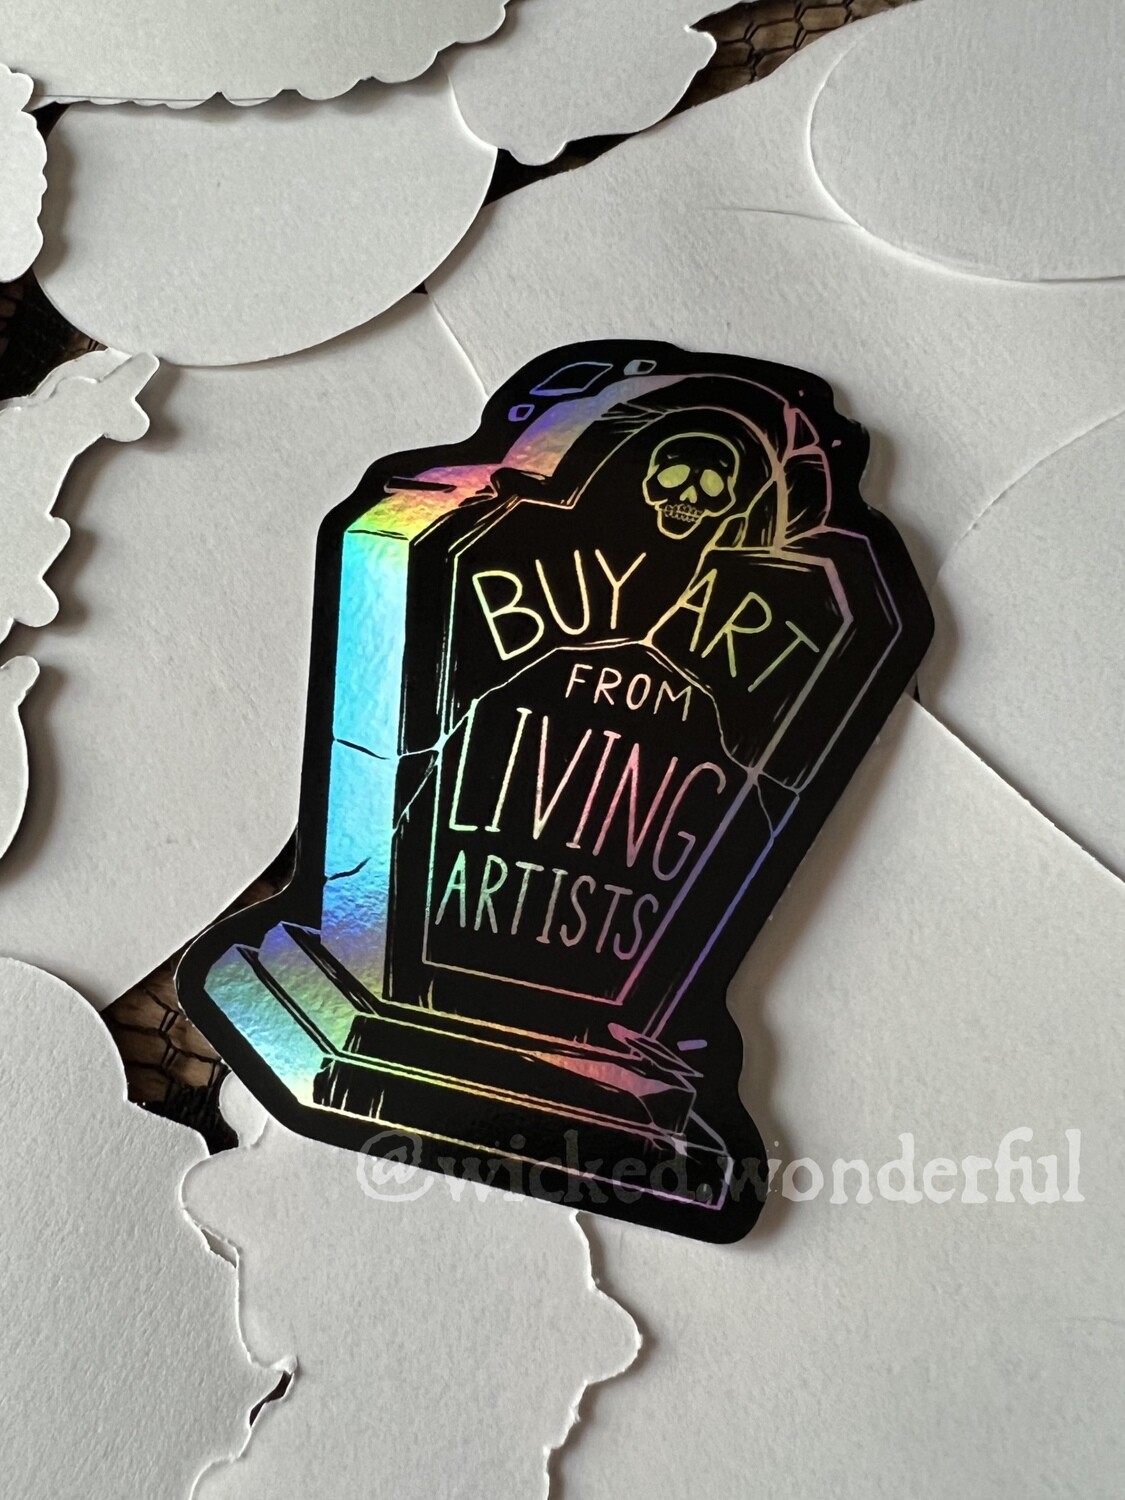 Buy Art from Living Artists (Holographic)